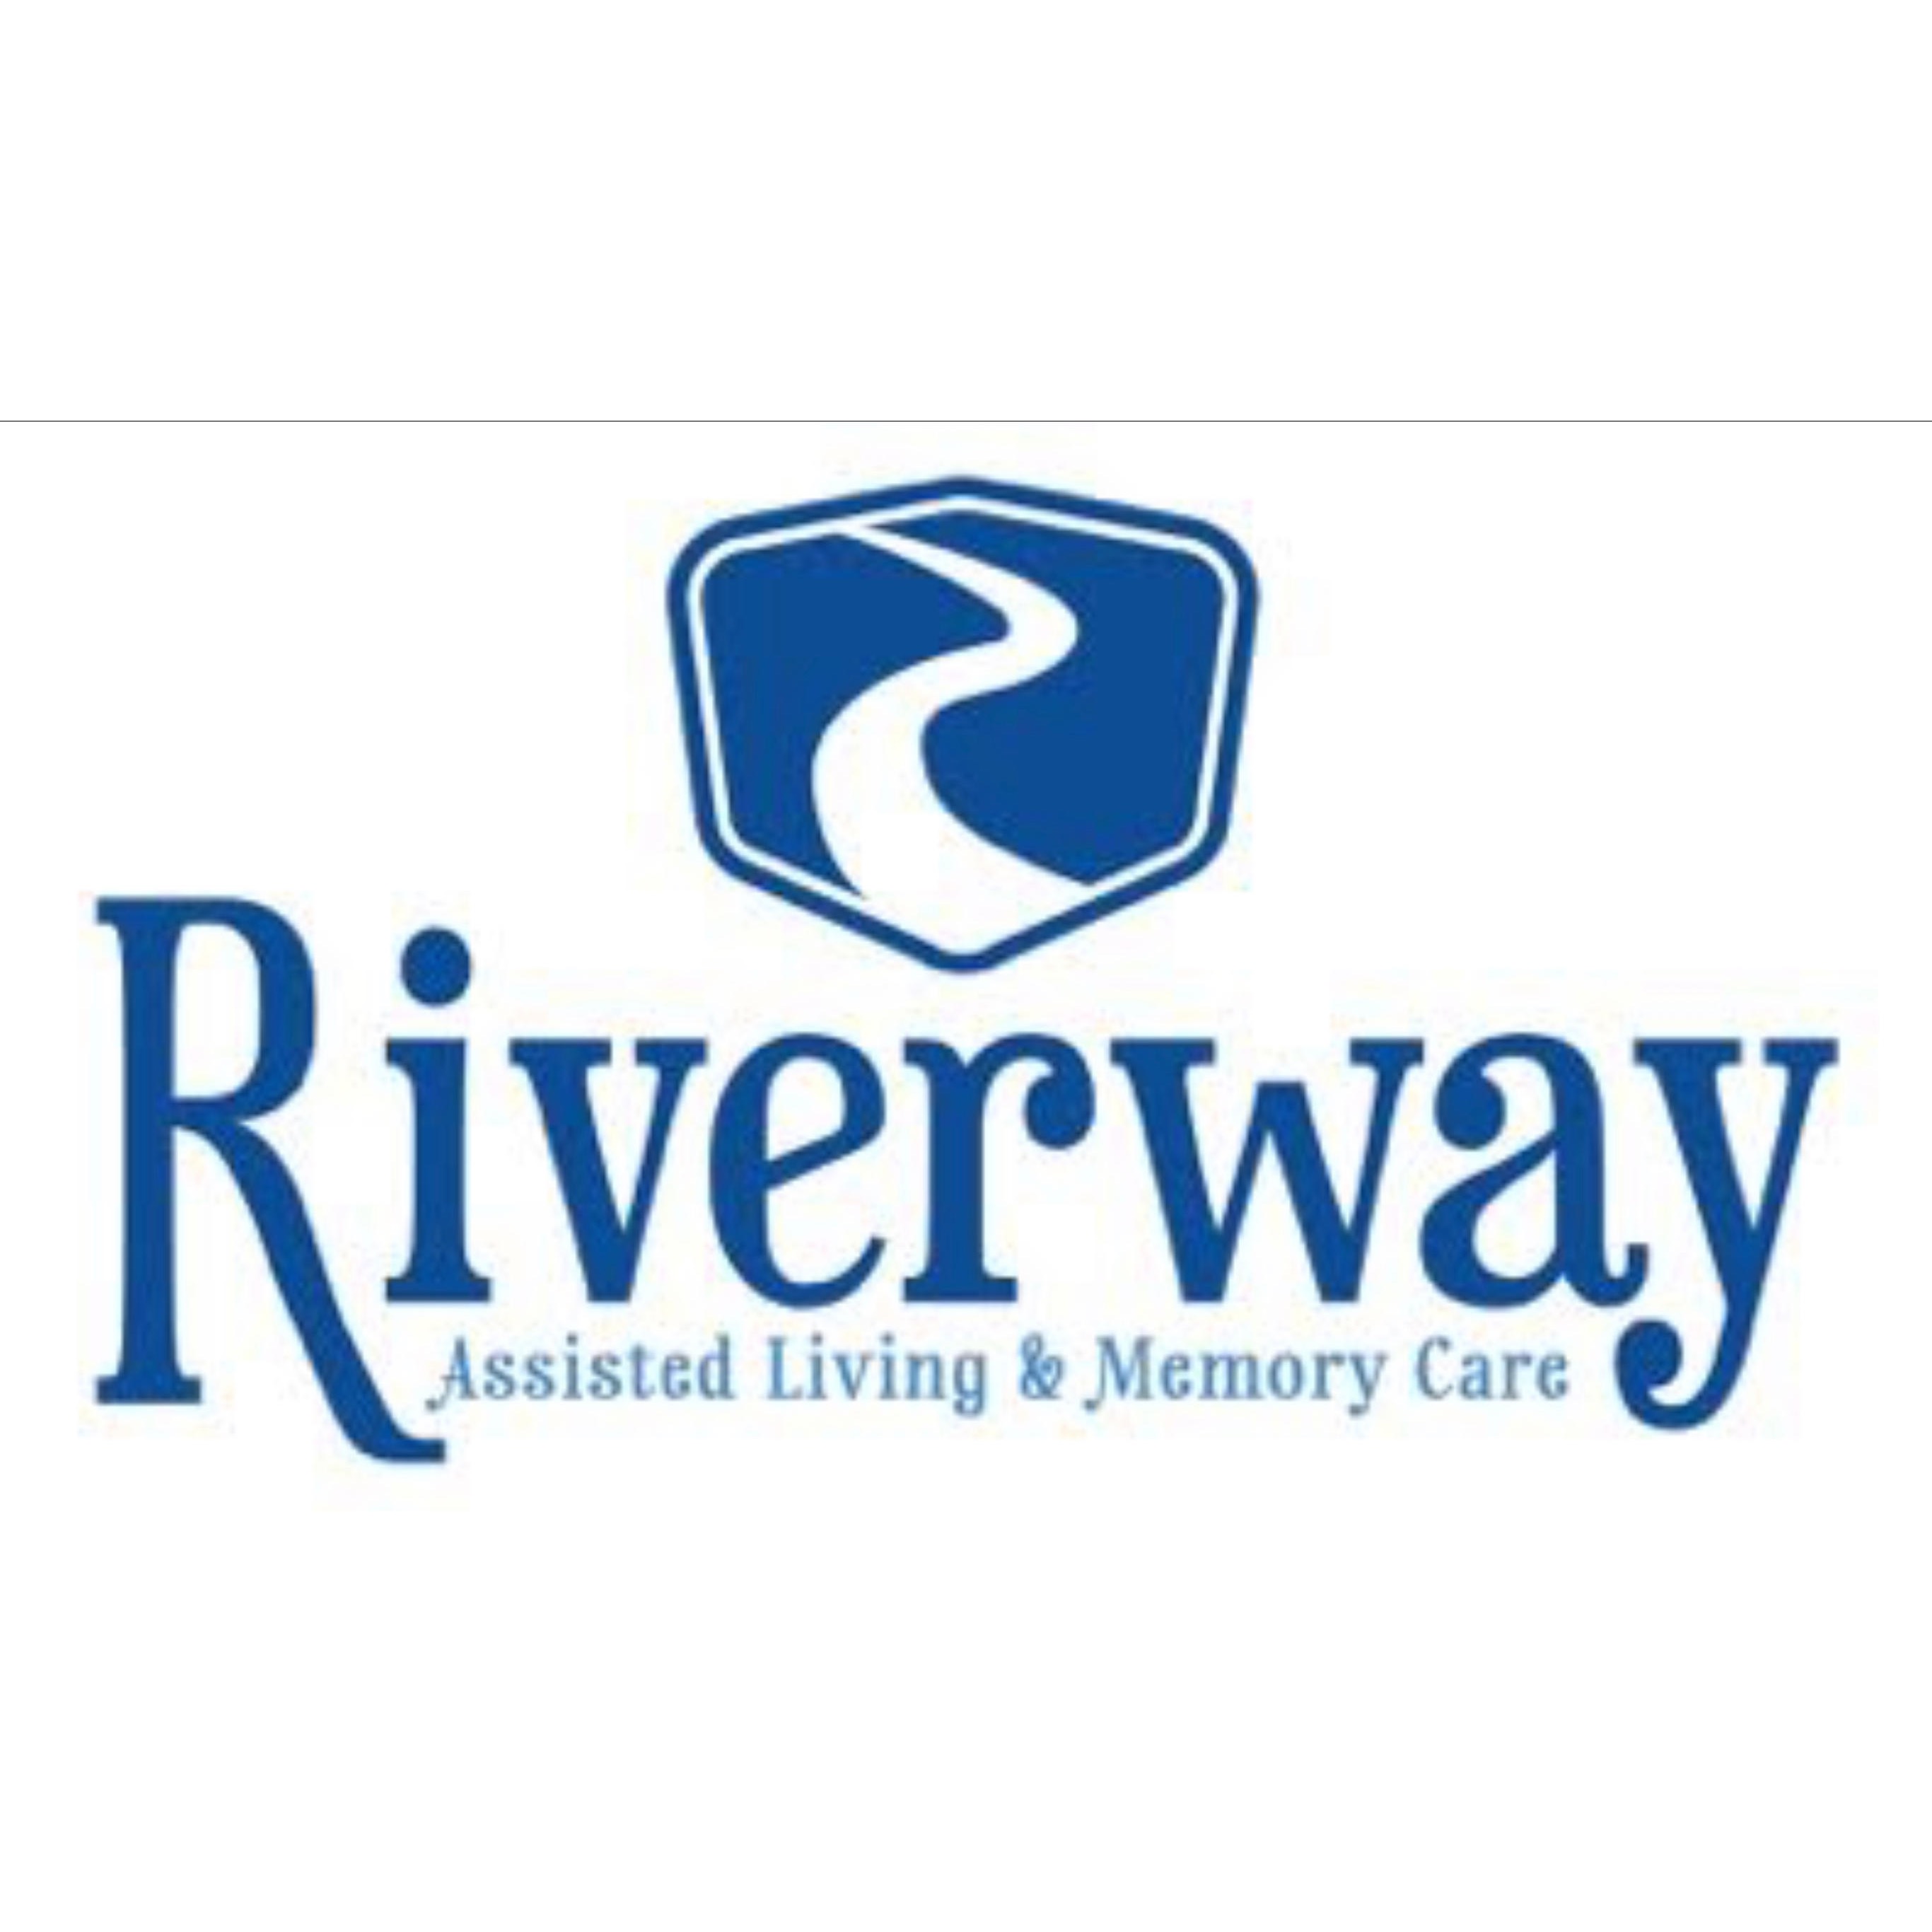 Riverway Assisted Living and Memory Care Logo